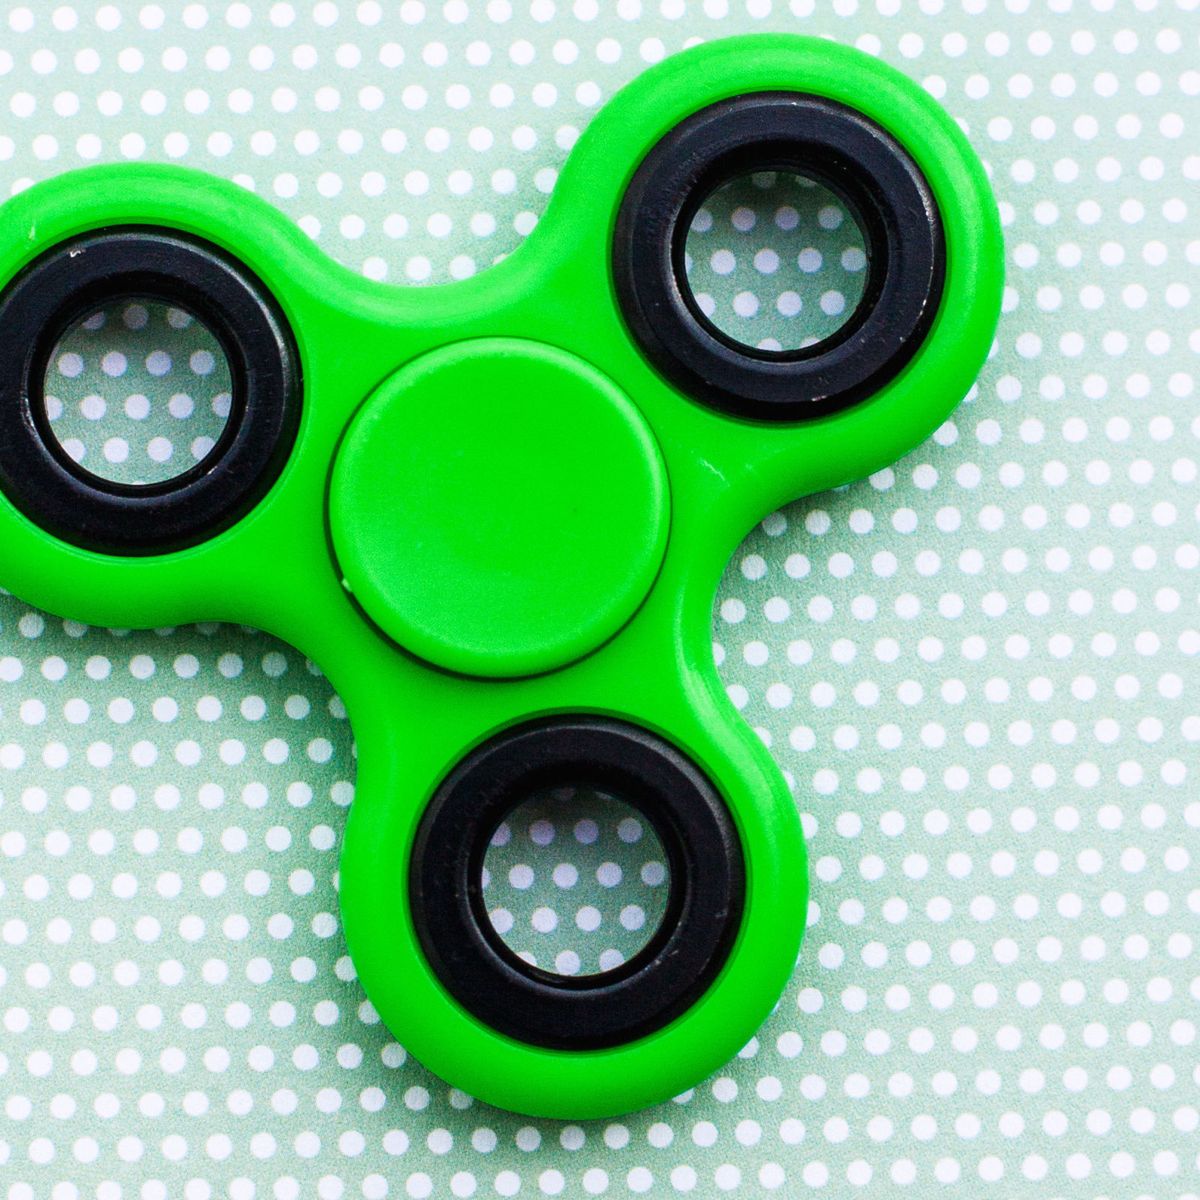 What Are Fidget Spinners? - Controversy Around Fidget Spinners